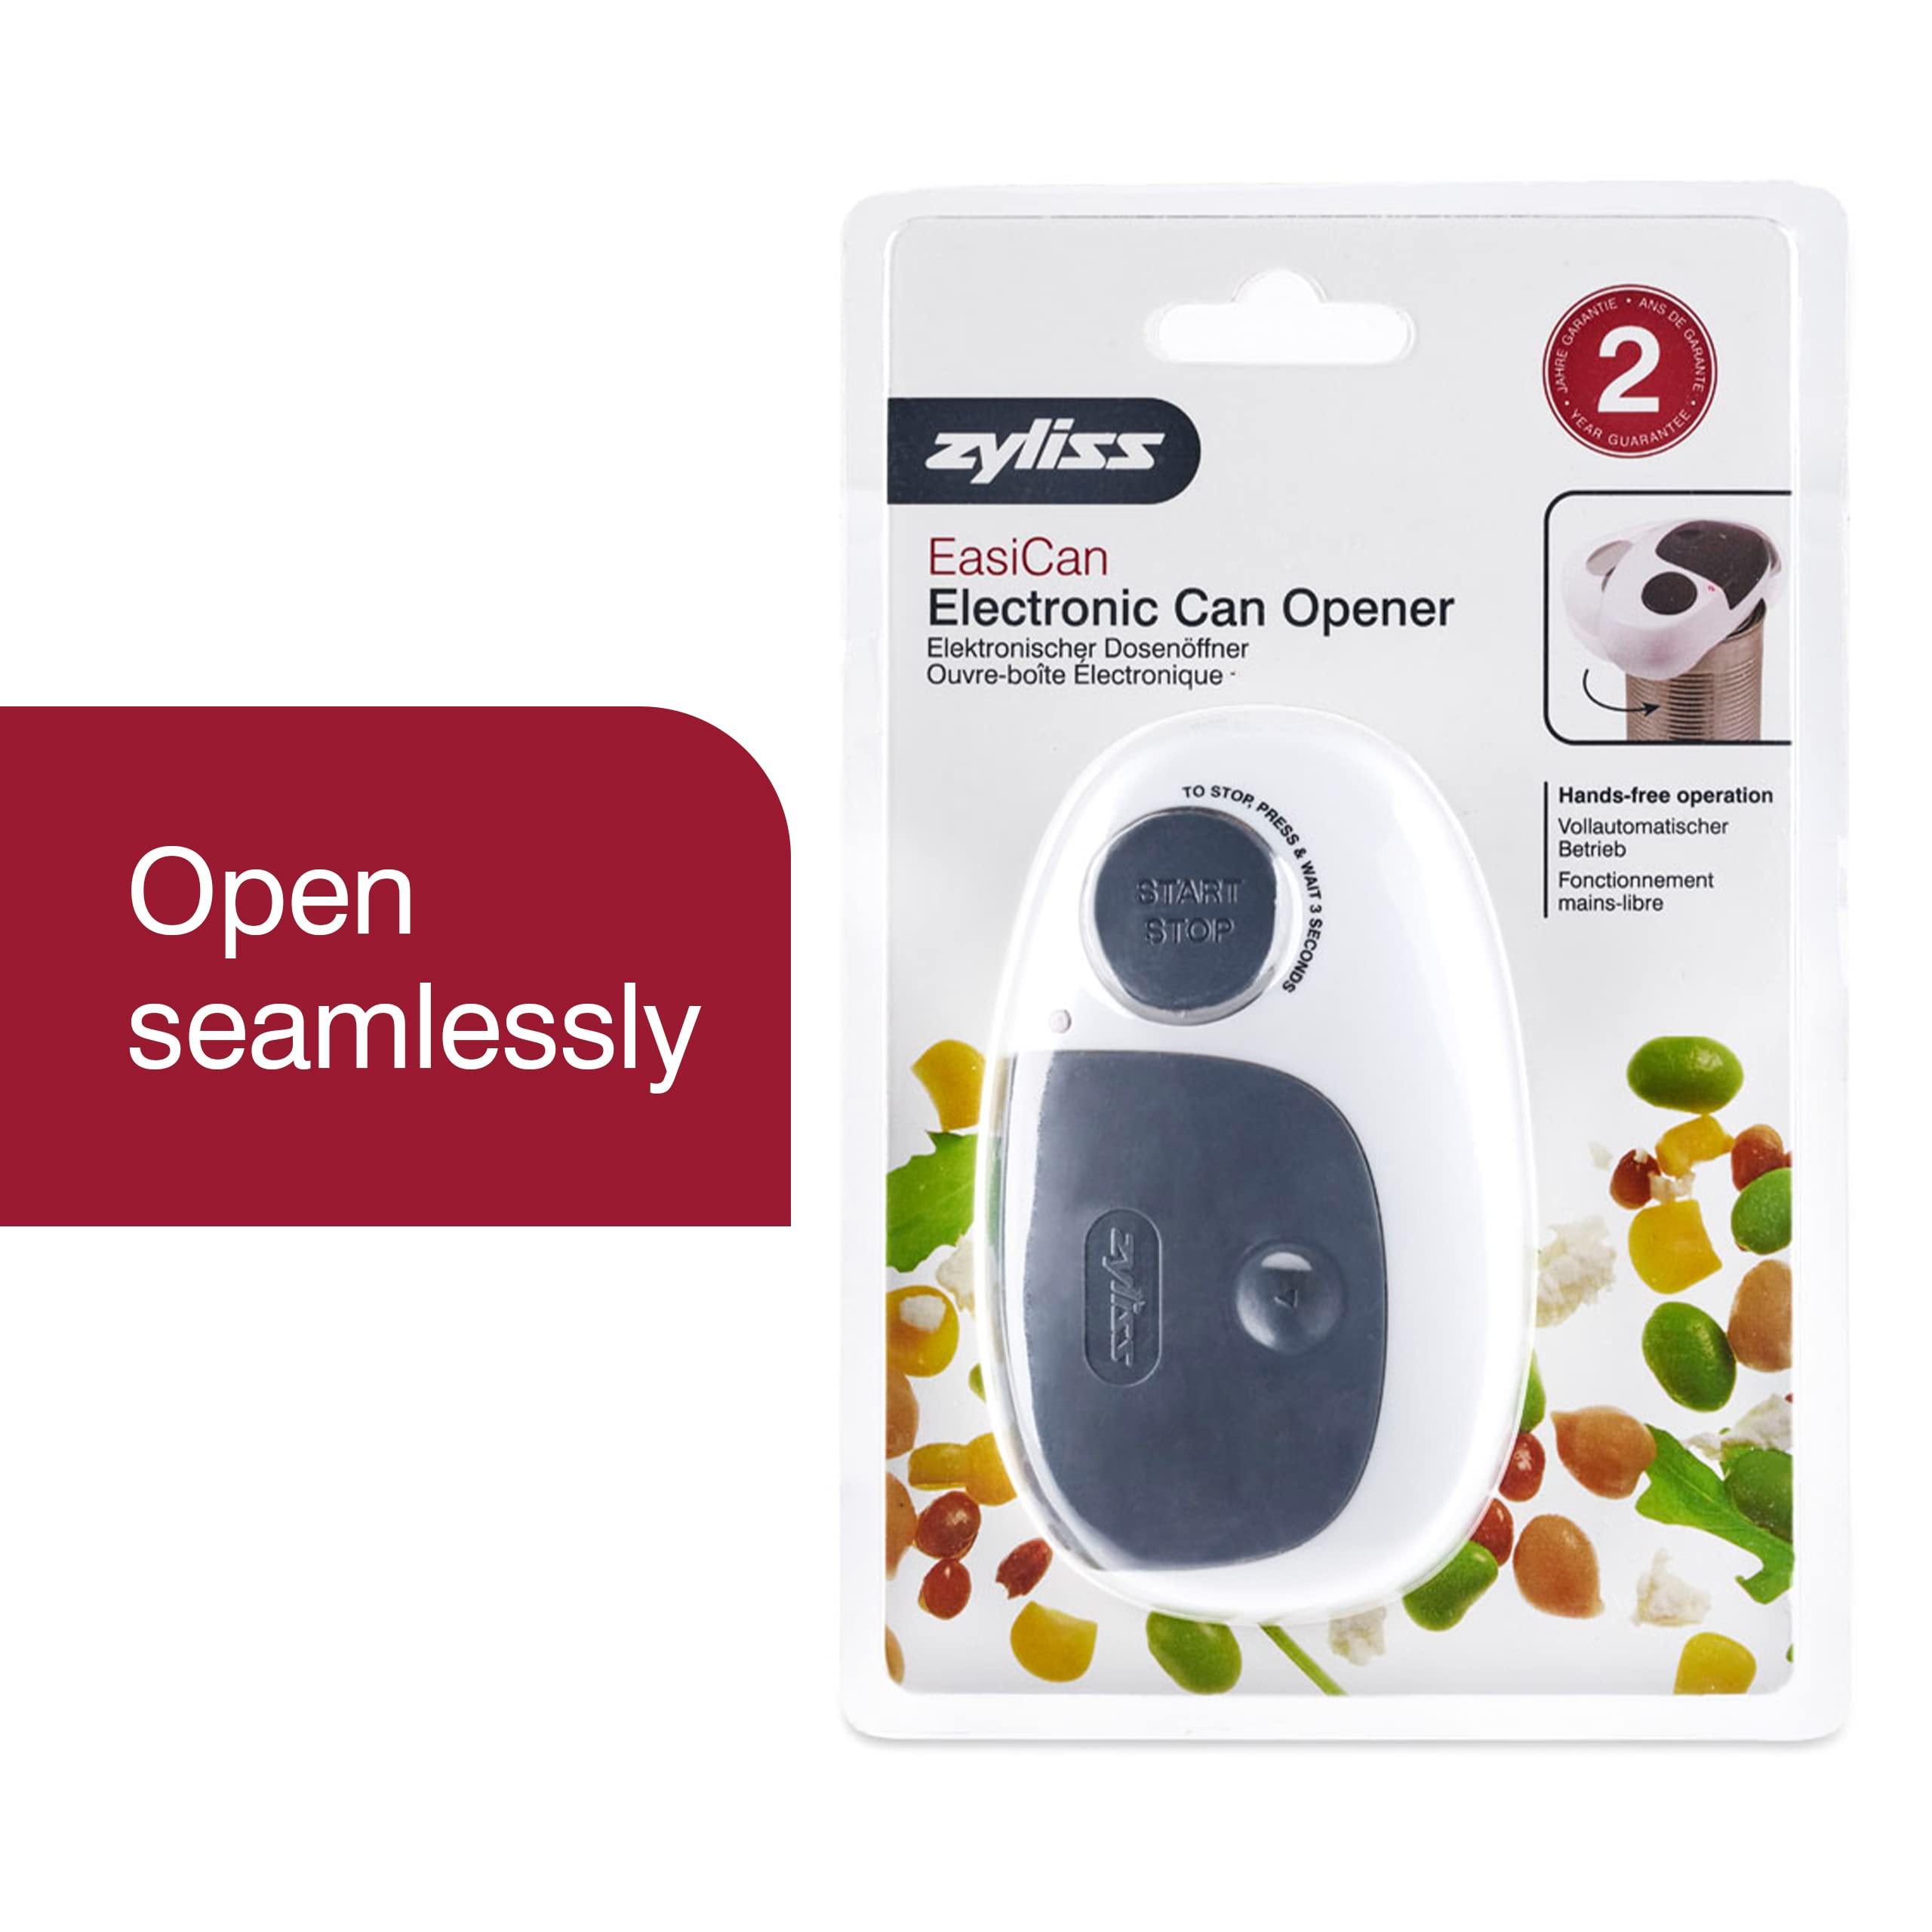 Zyliss EasiCan Electronic Can Opener - Electric Can Opener - Automatic, Smooth Edge Can Opener - Kitchen Tool & Gadget for Seniors & Arthritic Adults - Gray/White